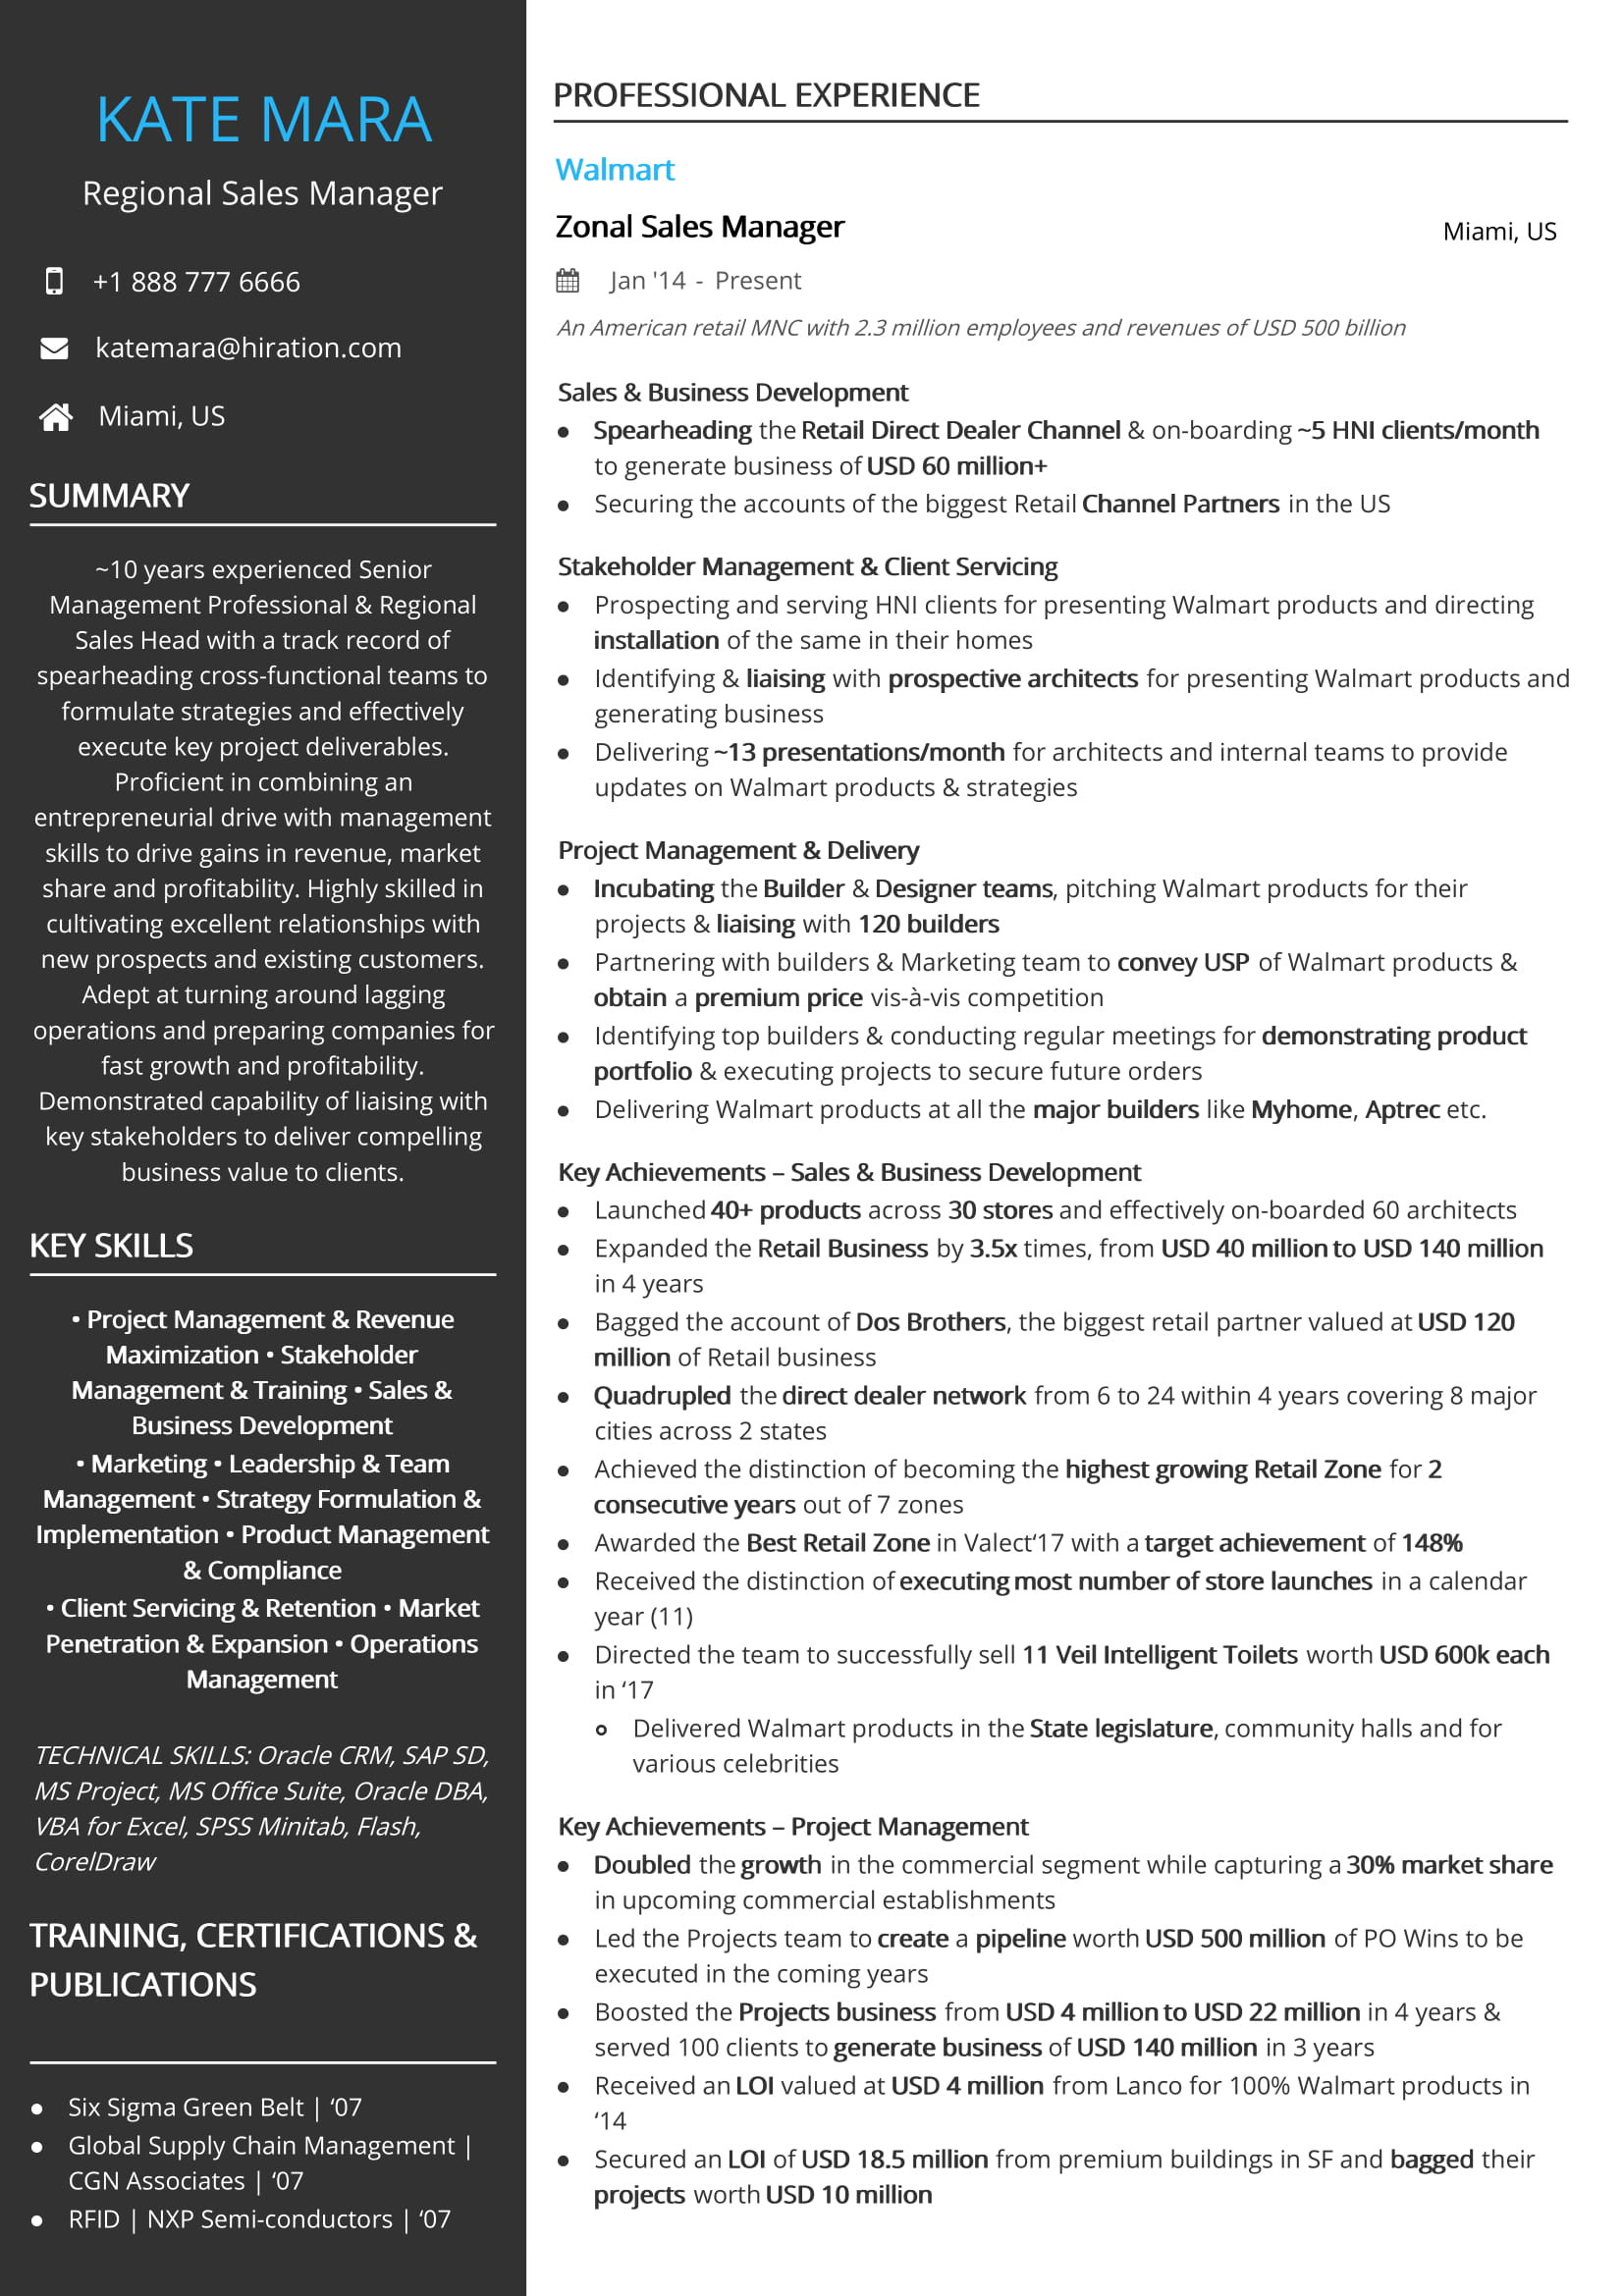 Resume Sample for A Sales Lead Generation Free Regional Sales Manager Resume Sample 2020 by Hiration